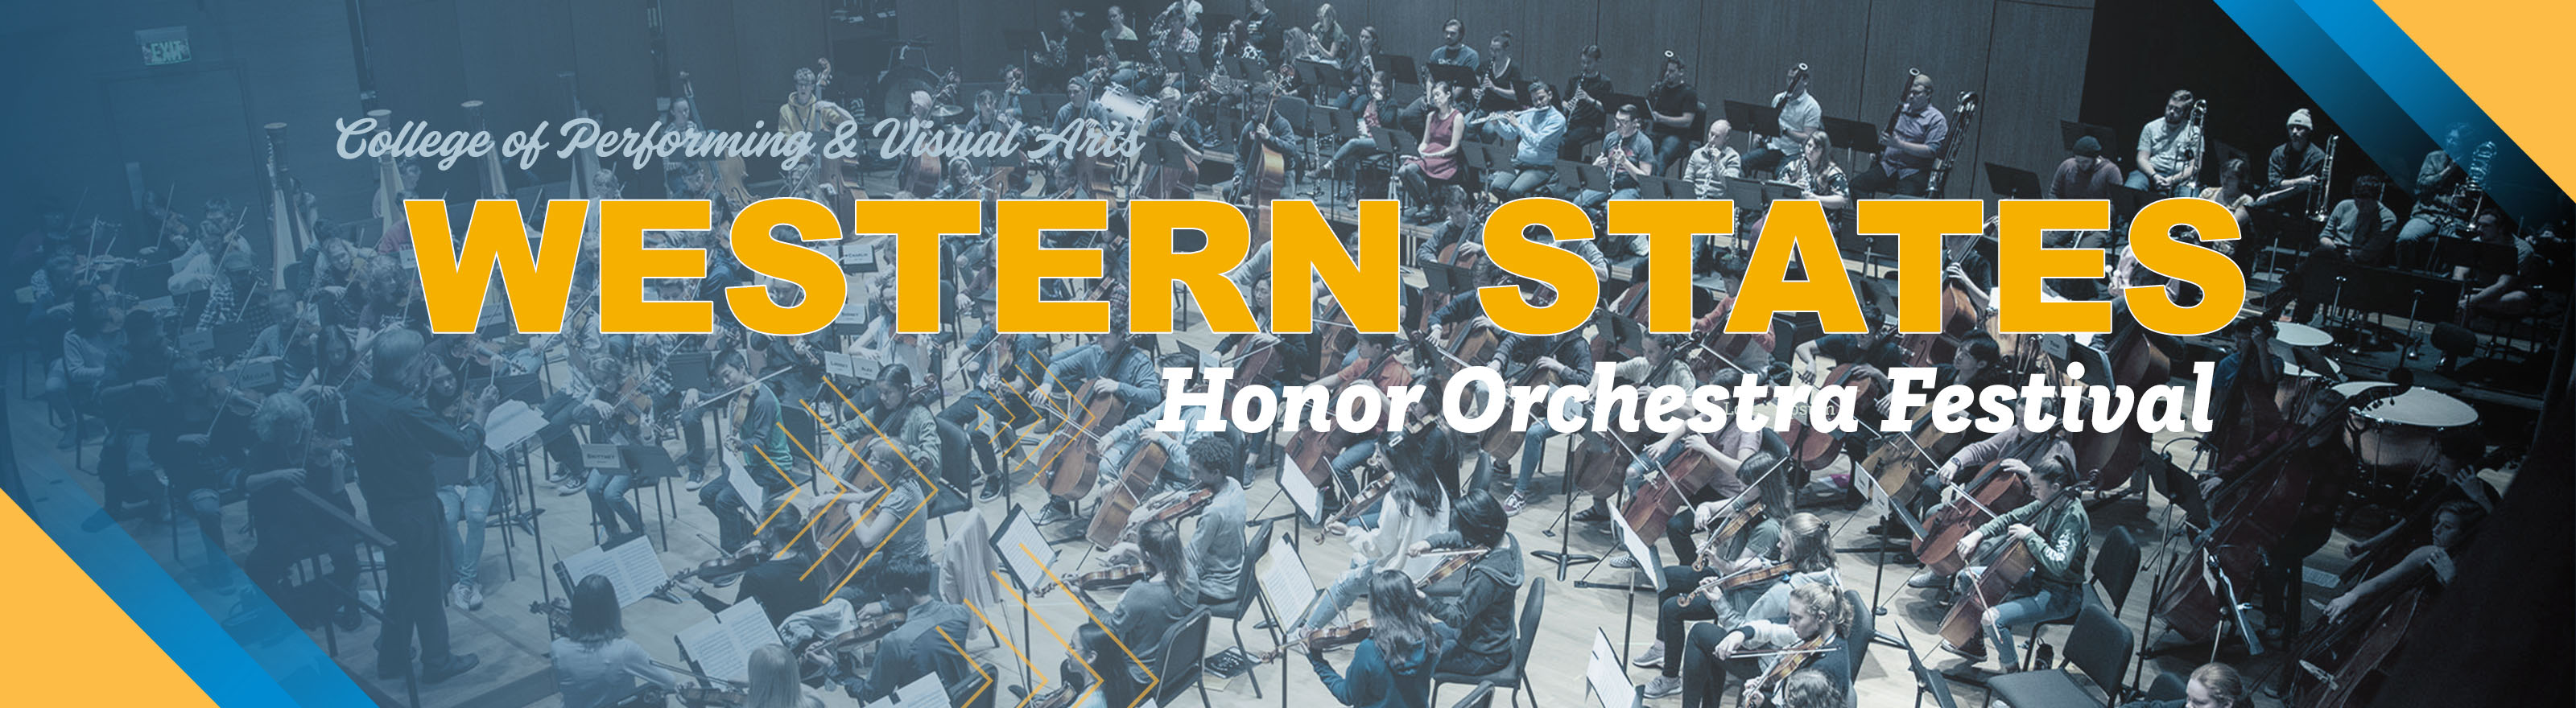 Western States Honor Orchestra Festival